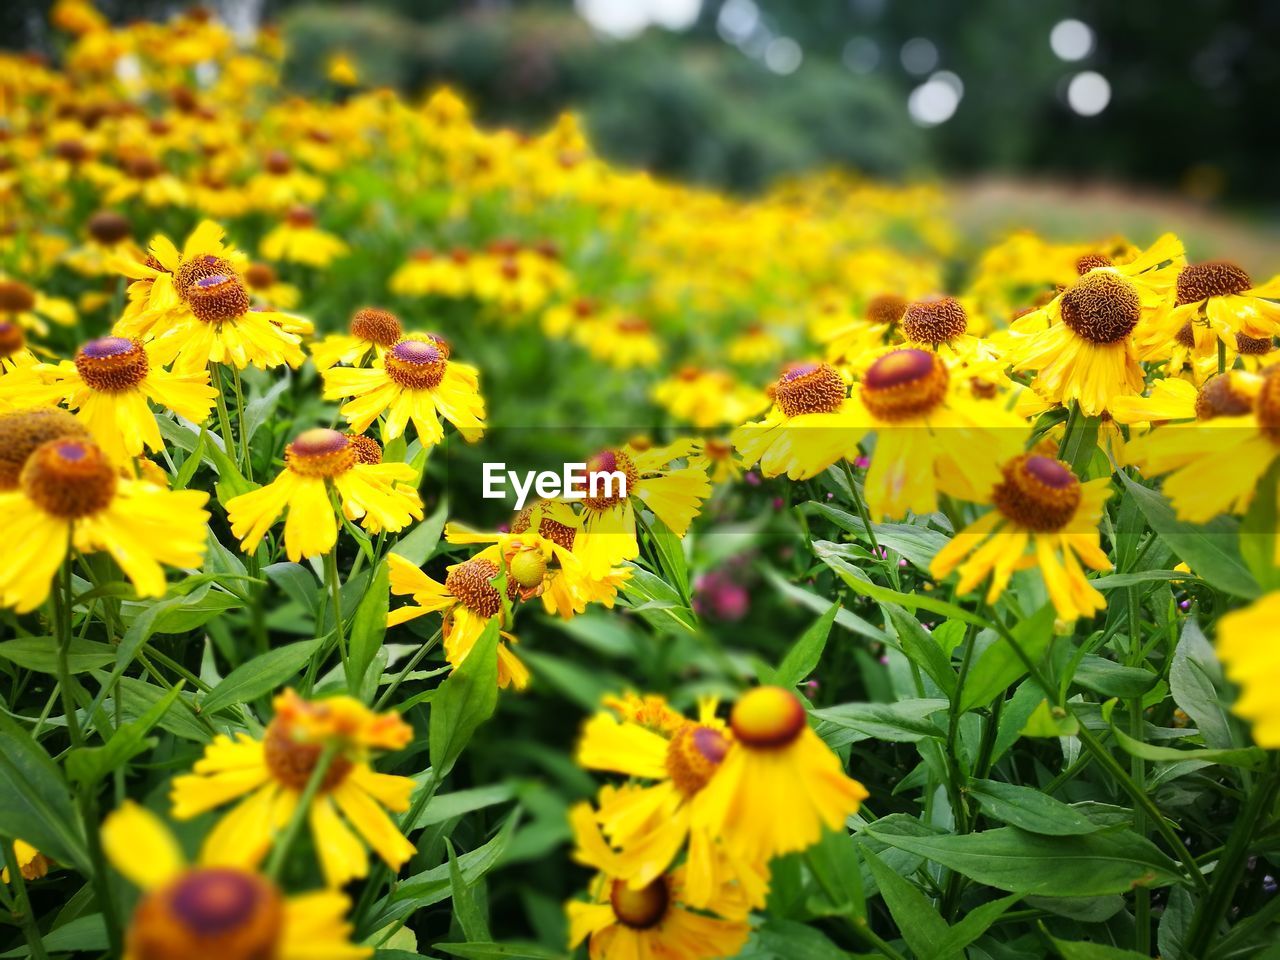 CLOSE-UP OF YELLOW FLOWERS IN PARK